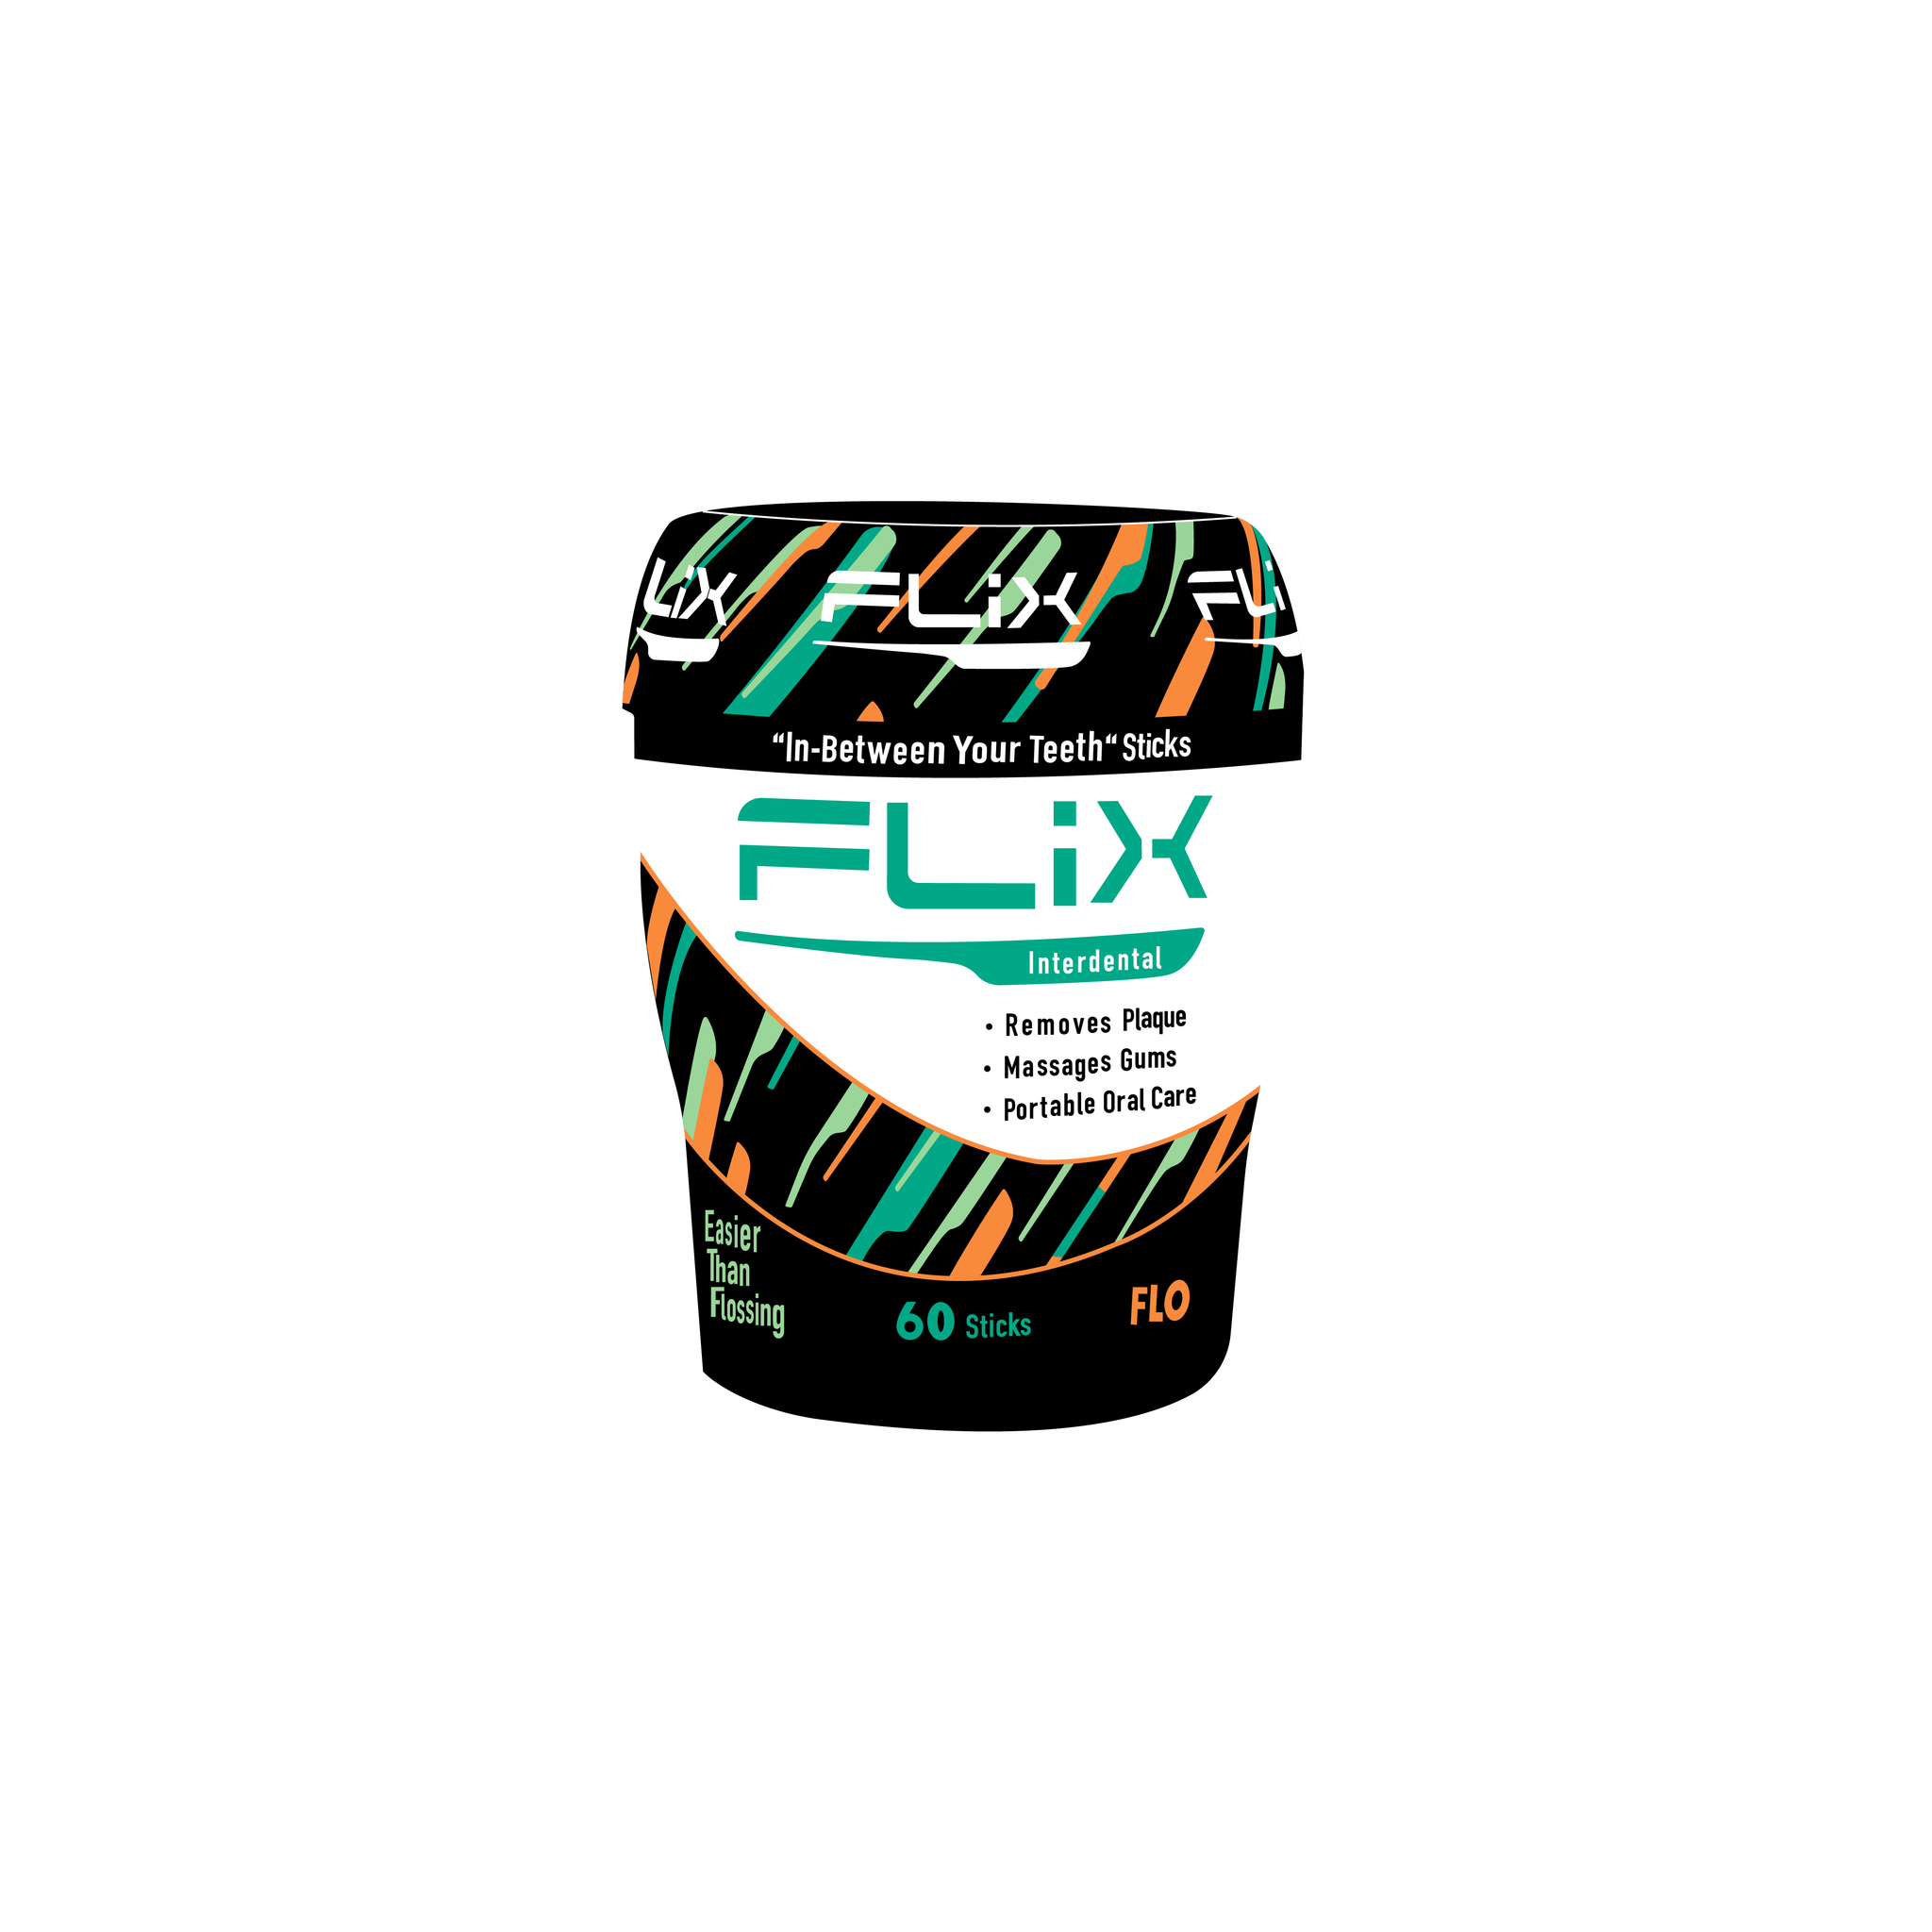 Container of FLIX interdental “in between your teeth” sticks with a green and orange stick pattern. Container advertises FLIX “removes plaque, massages gums, and is portable oral care,” and that there are 60 sticks in the container.